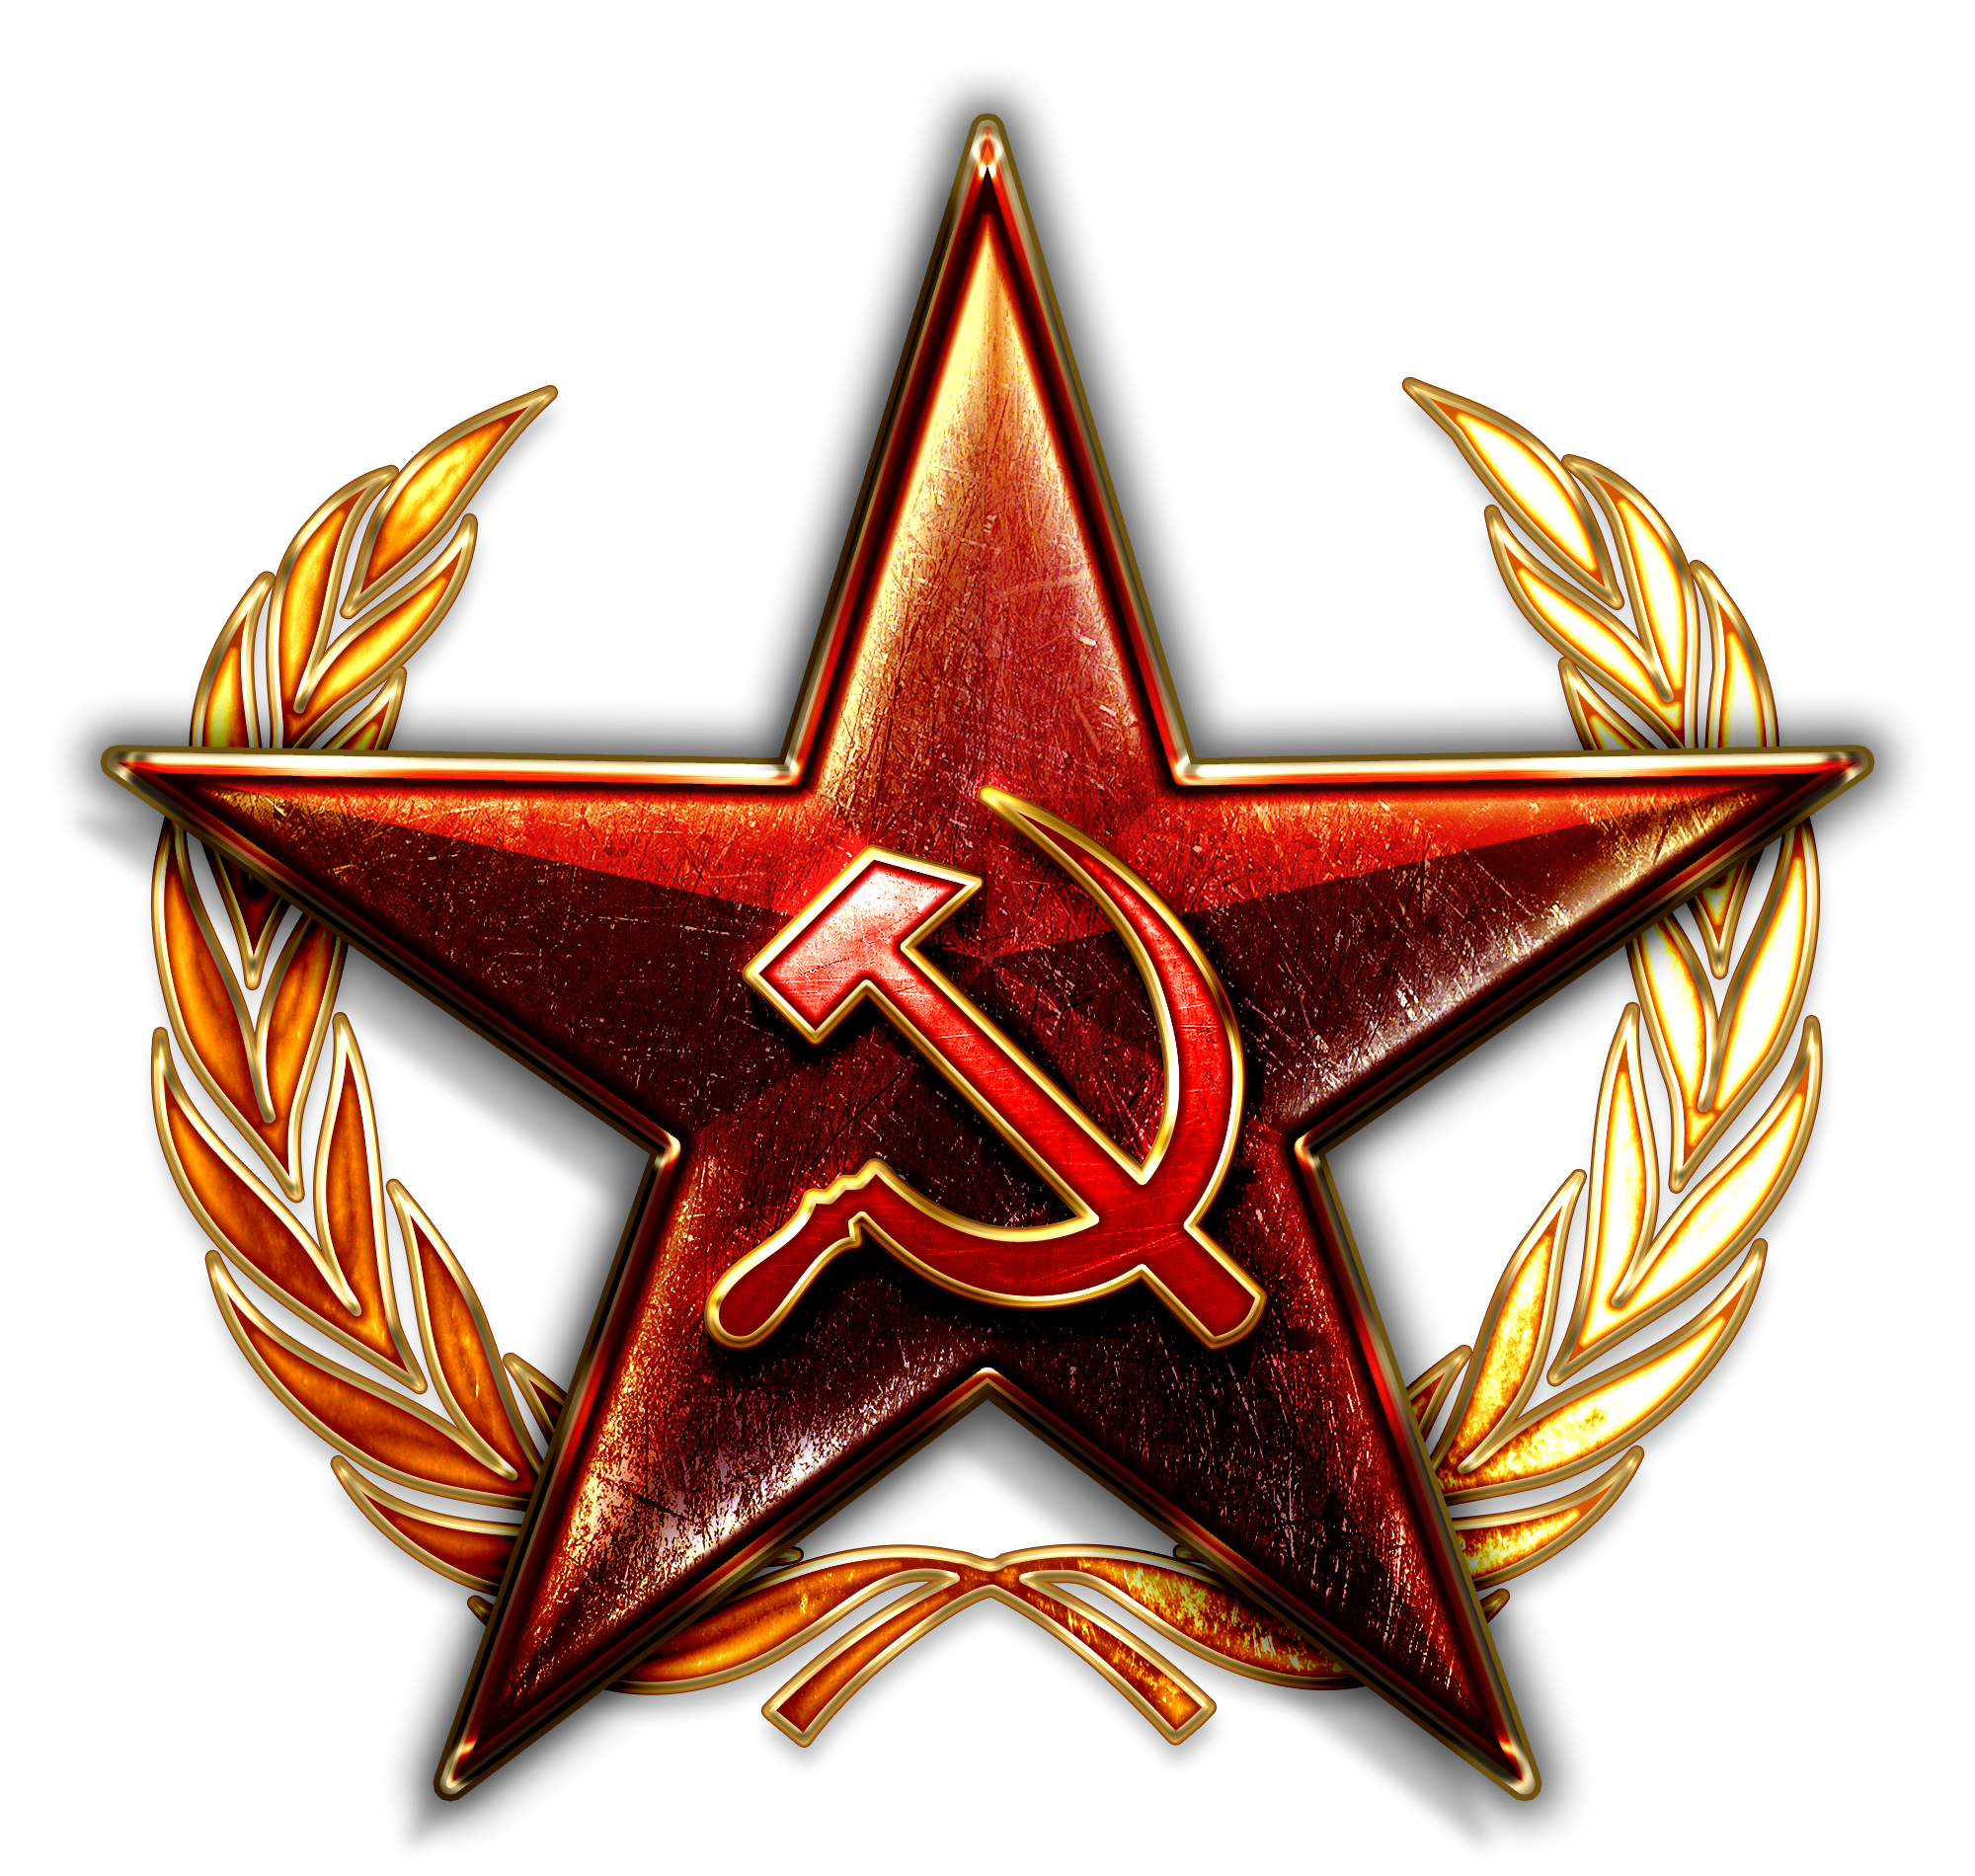 Final Warsaw Pact faction logo image - Red March - Mod DB